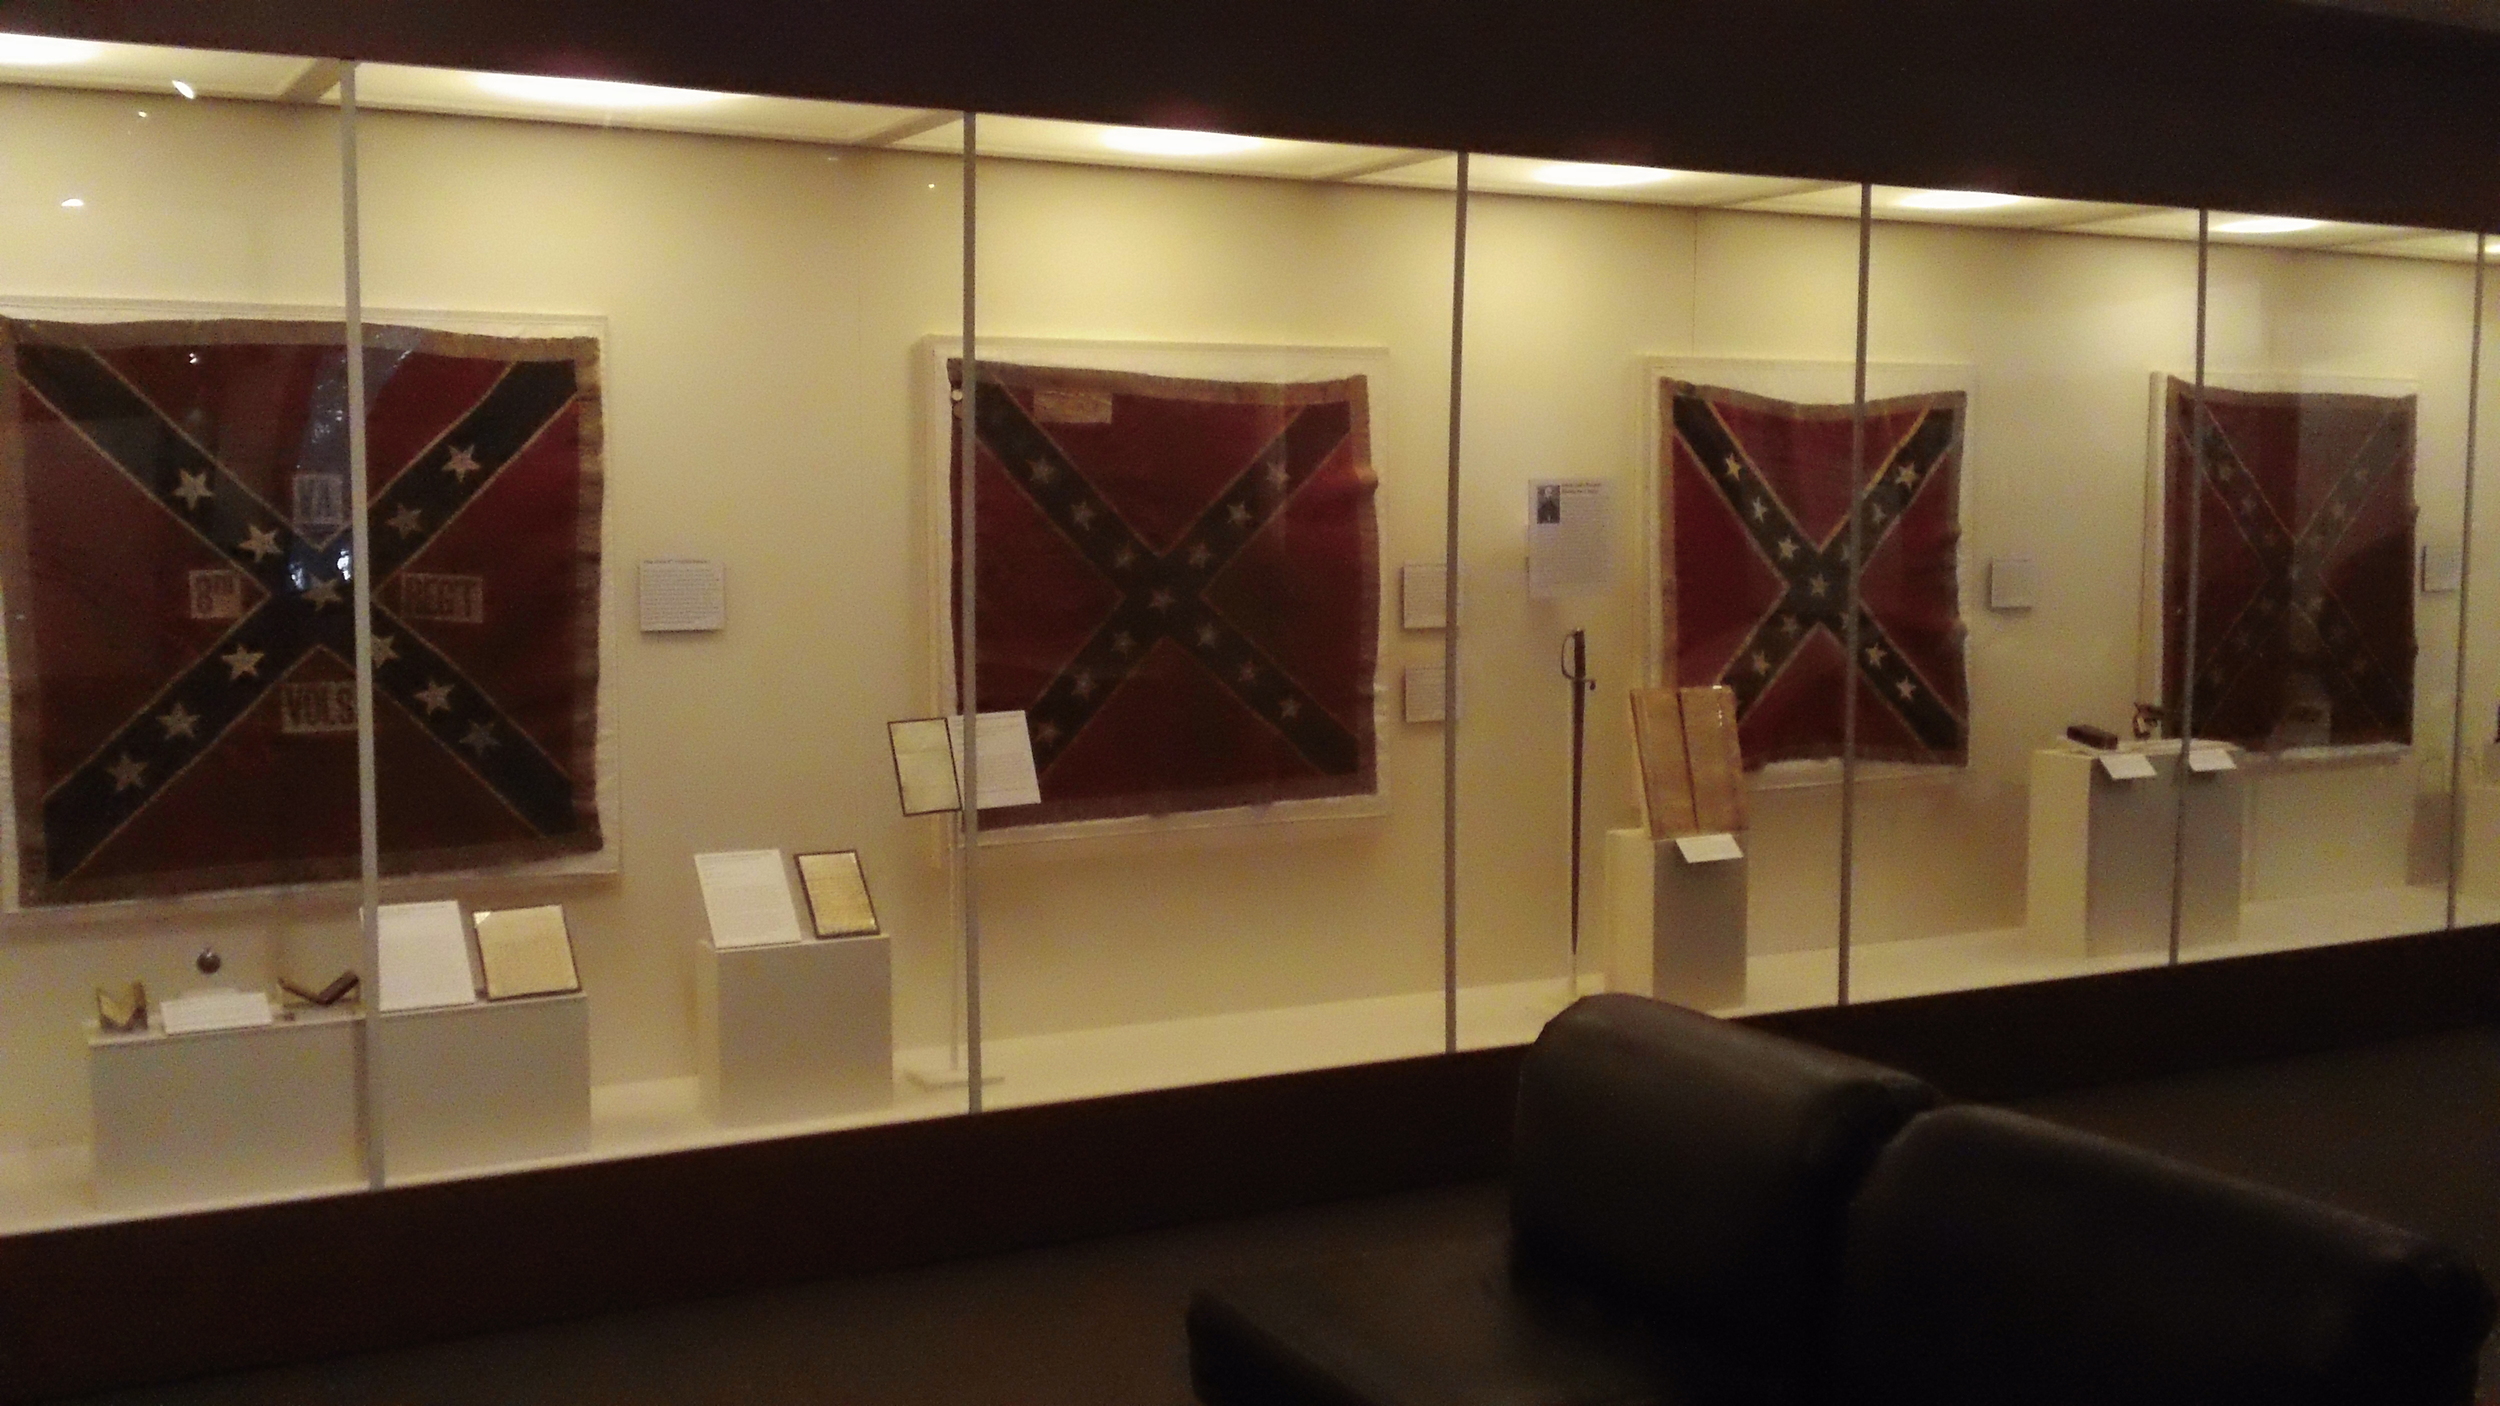  Confederate Battle Flags used during Pickett's Charge. This was quite a powerful display.&nbsp; 